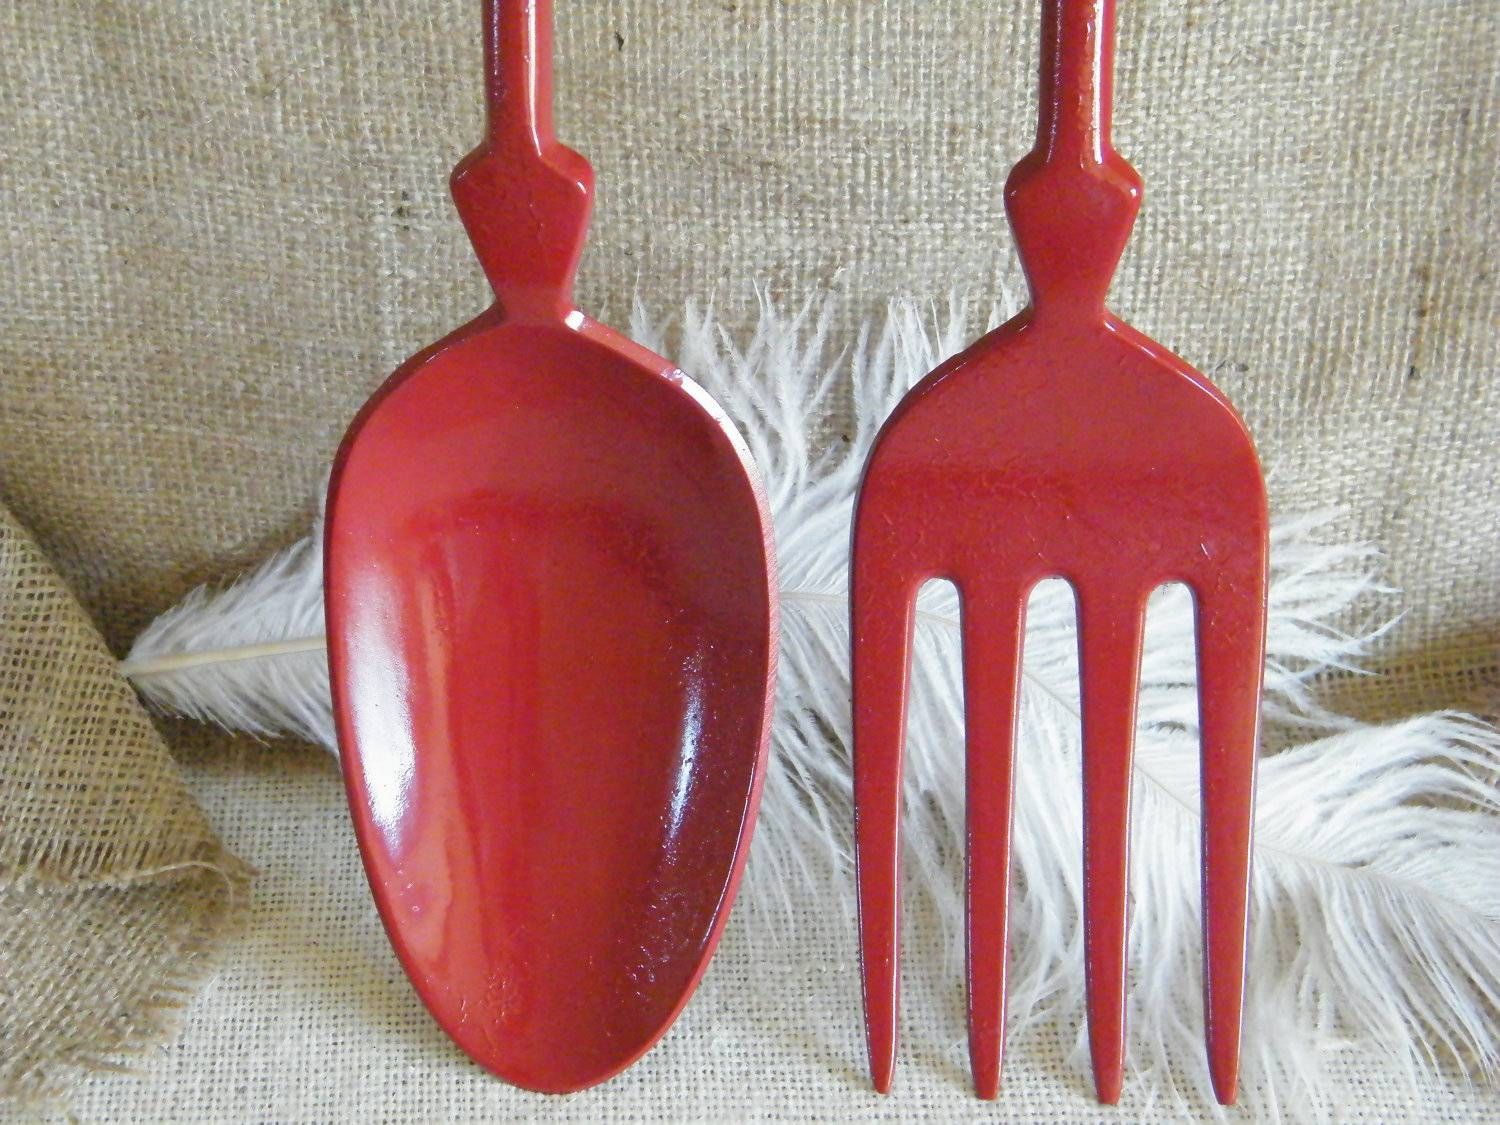 Unique Oversized Spoon And Fork Wall Decor Nice Image : Oversized Intended For Latest Big Spoon And Fork Decors (View 9 of 25)